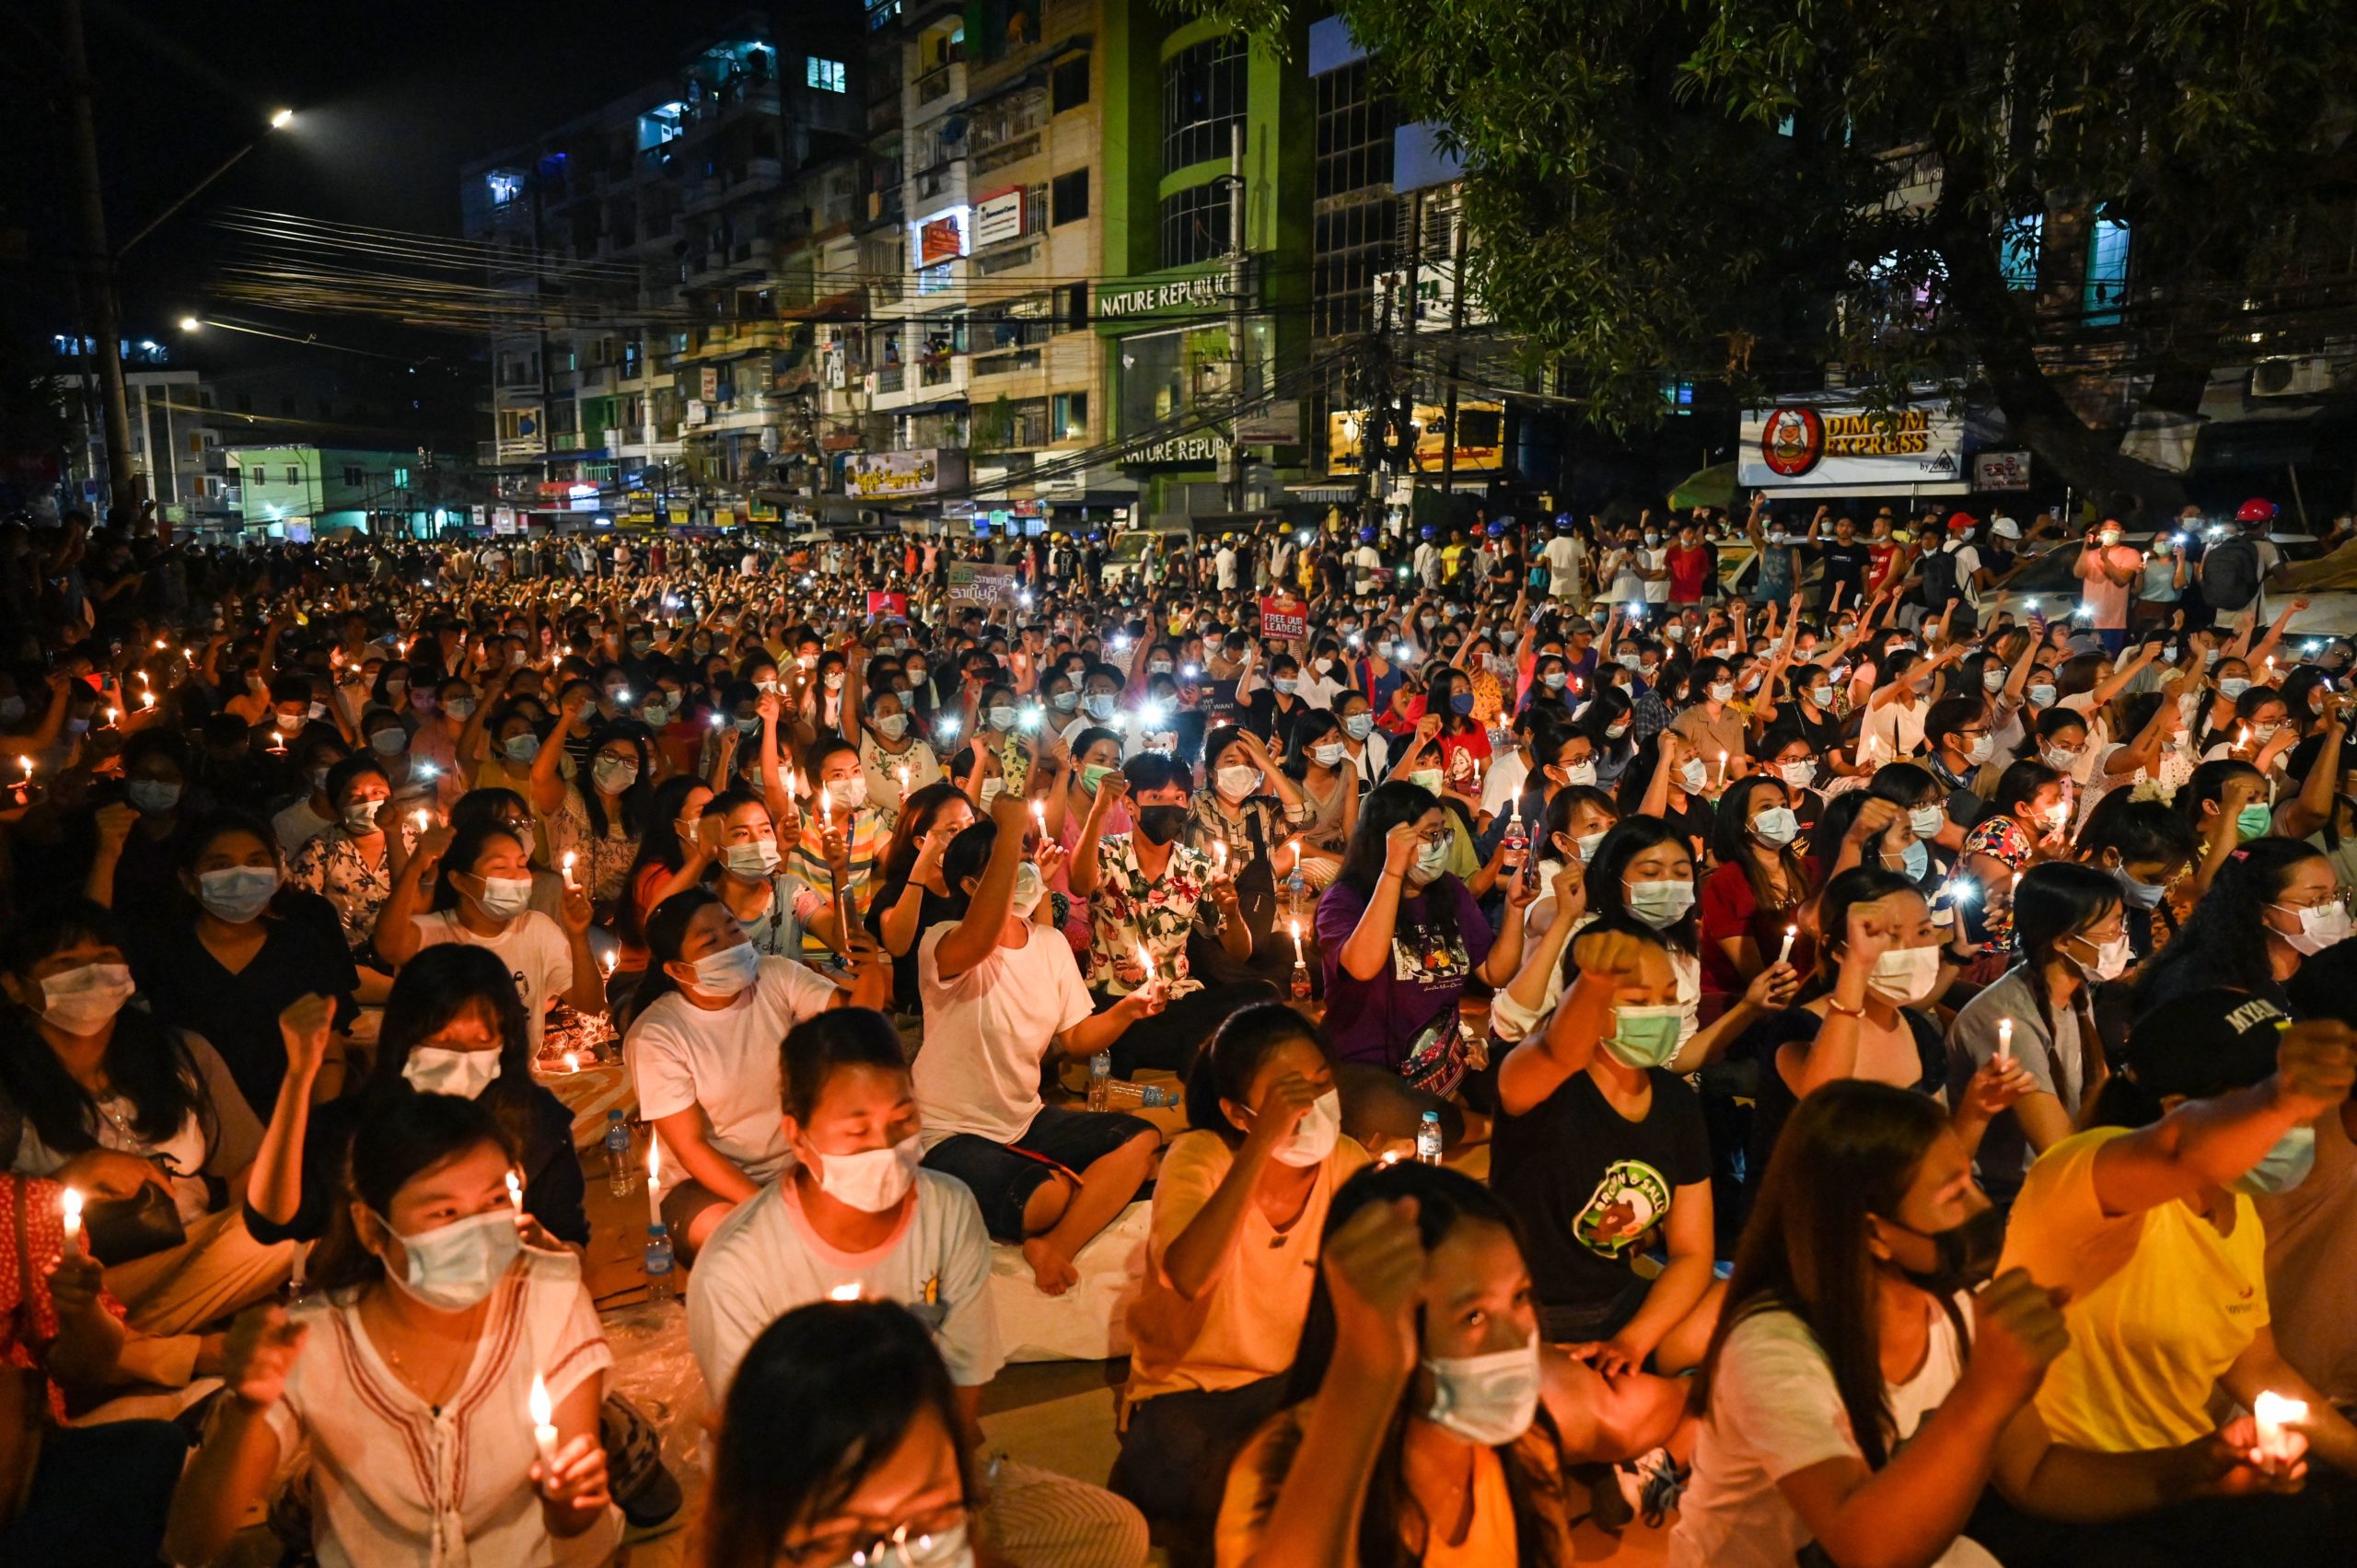 Protesters gesture during a candlelight vigil to honour those who have died during demonstrations against the military coup in Yangon on March 13, 2021. (Photo by STR / AFP) (Photo by STR/AFP via Getty Images)